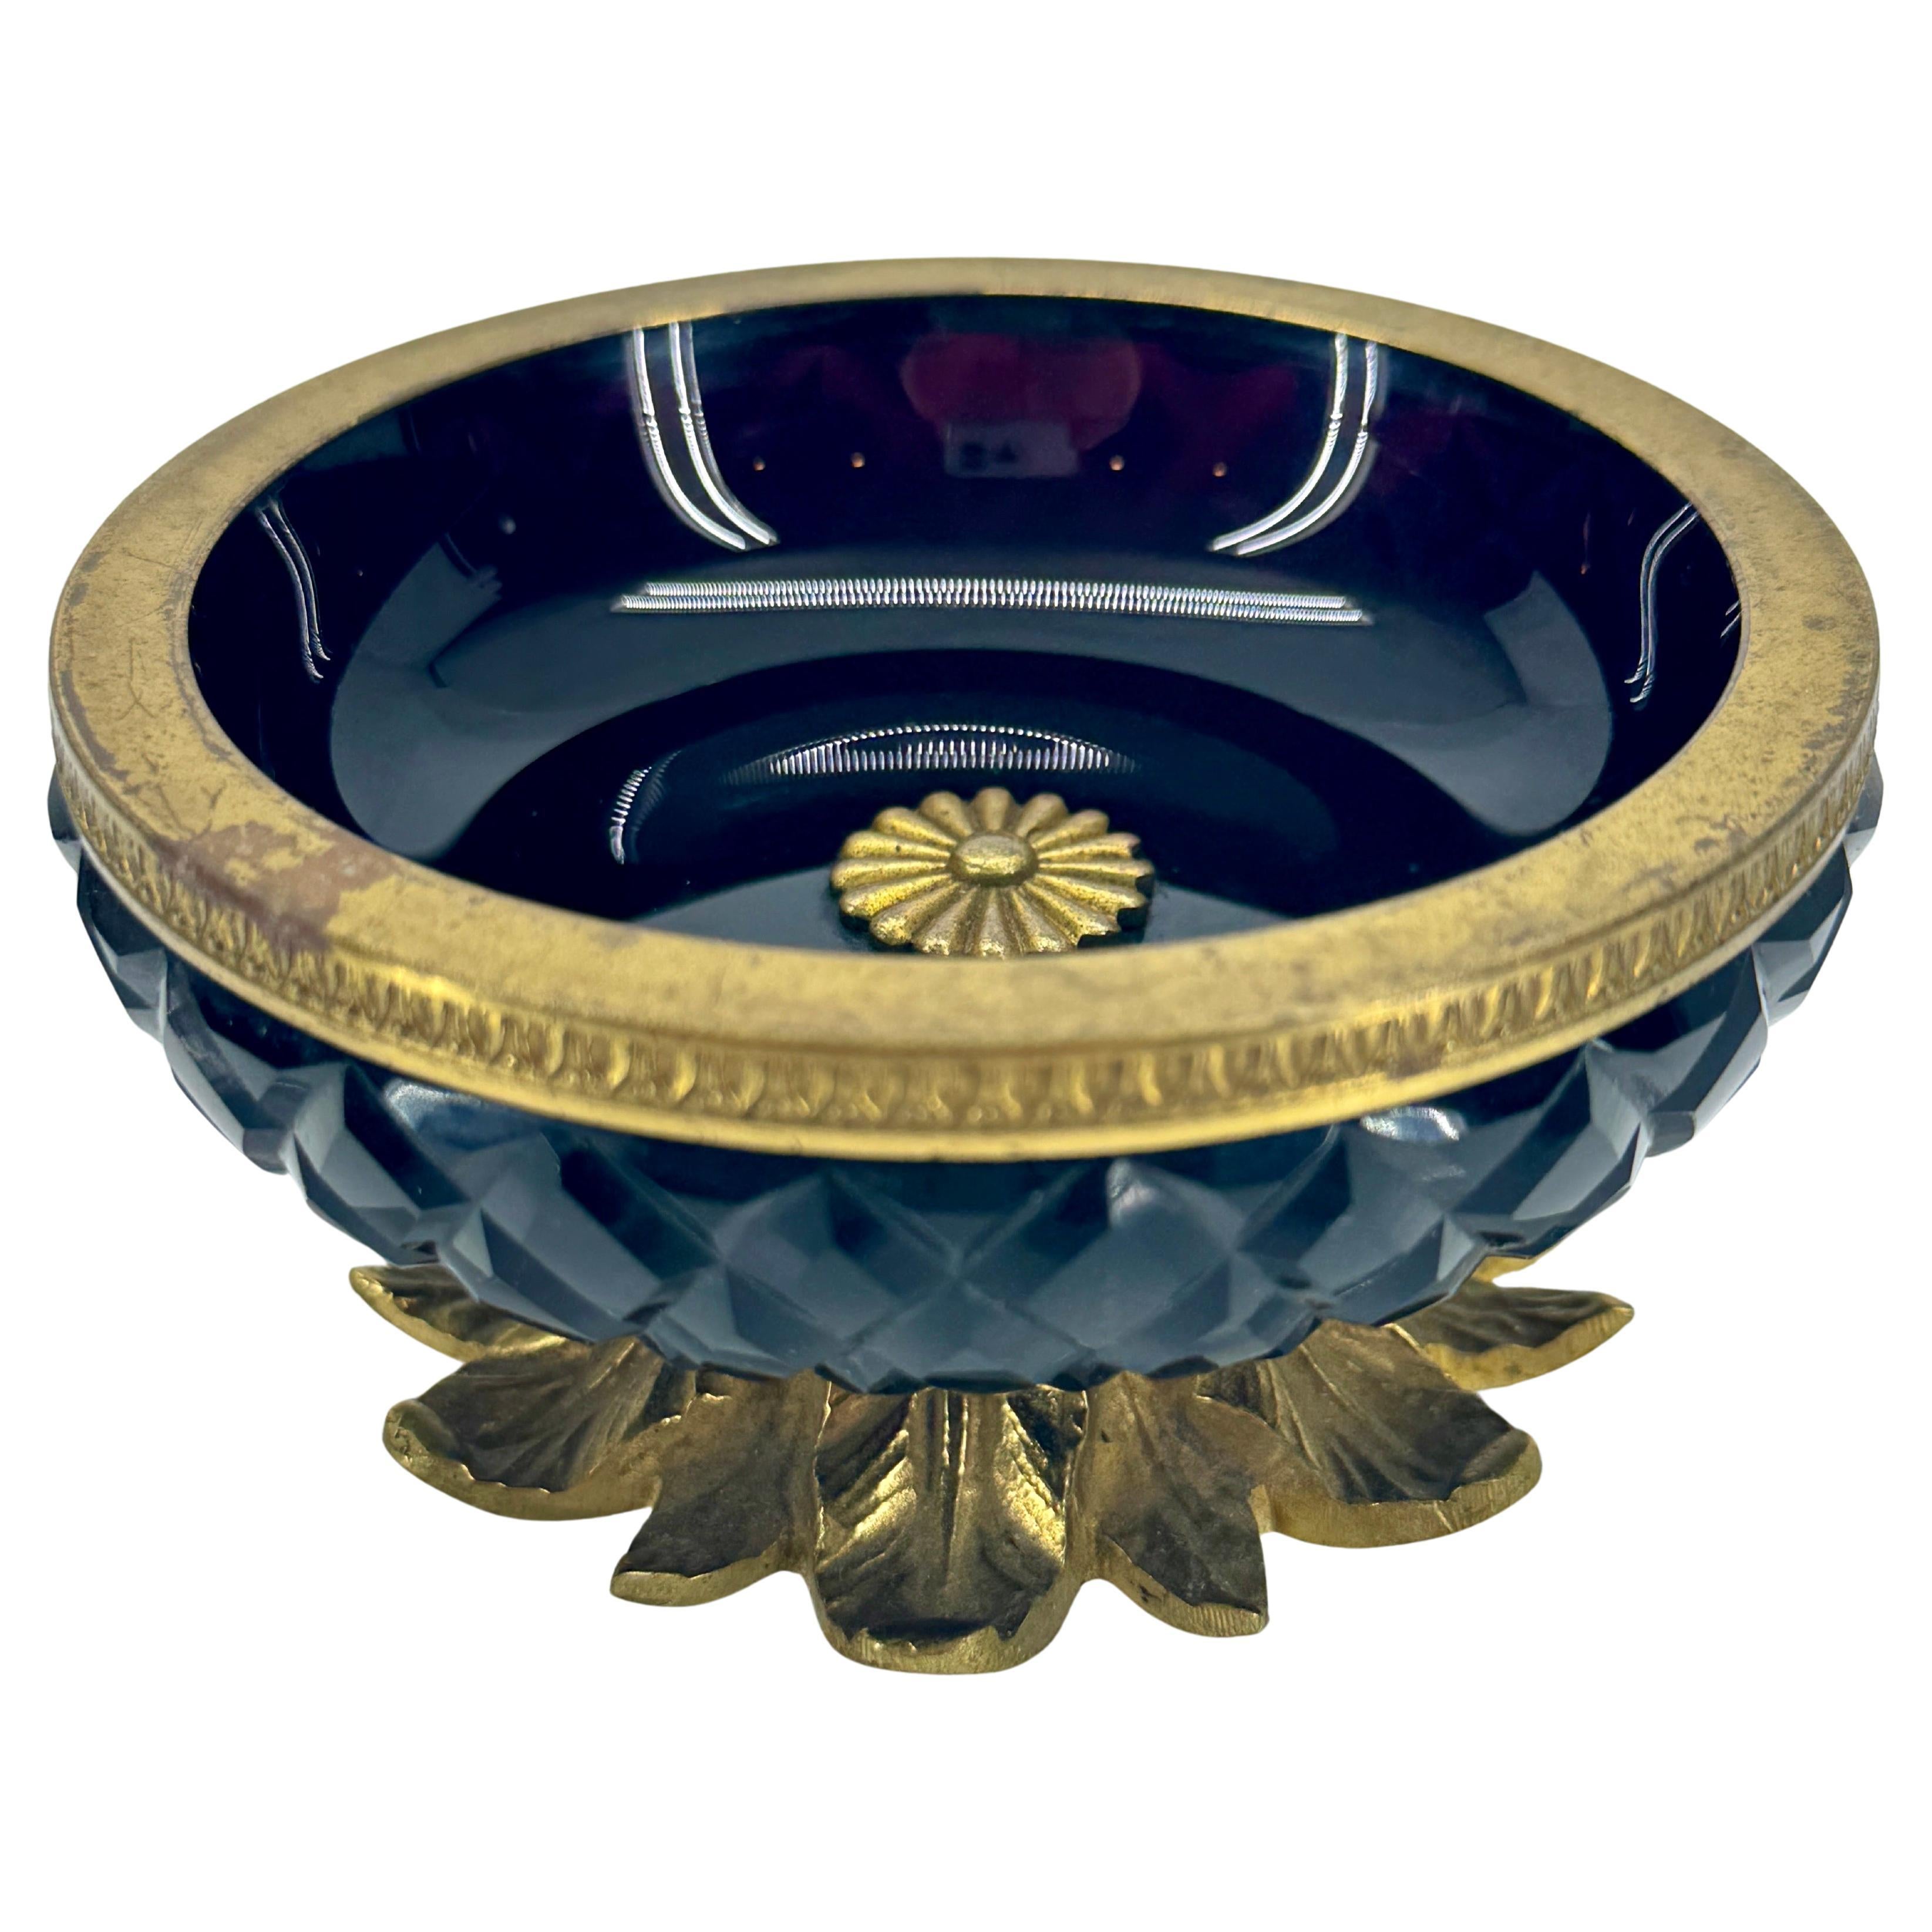 Gilt Bronze and Amethyst Cut Crystal Bowl, France

This classically inspired bowl is decorated with bronze detailing including foliate bronze feet. Versatile piece that can be displayed on a side table sitting alone as decorative or also would make